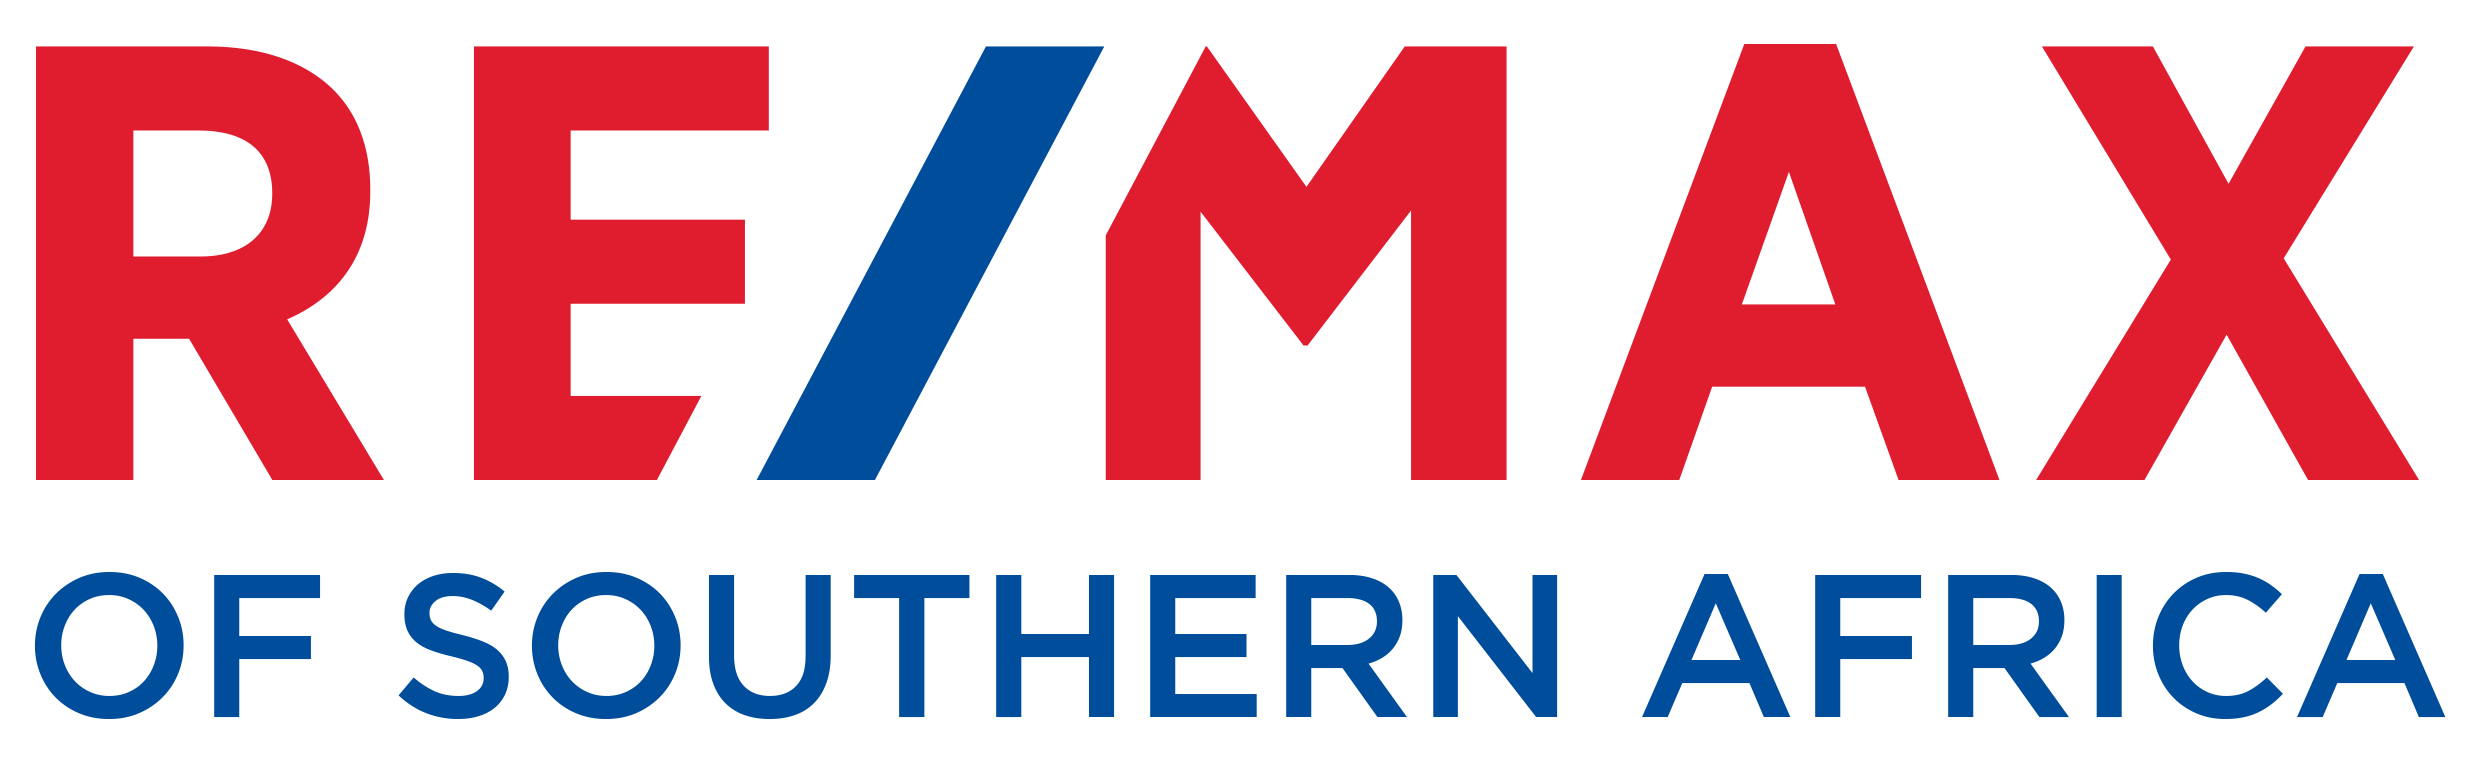 Remax.com Logo - RE MAX Of Southern Africa